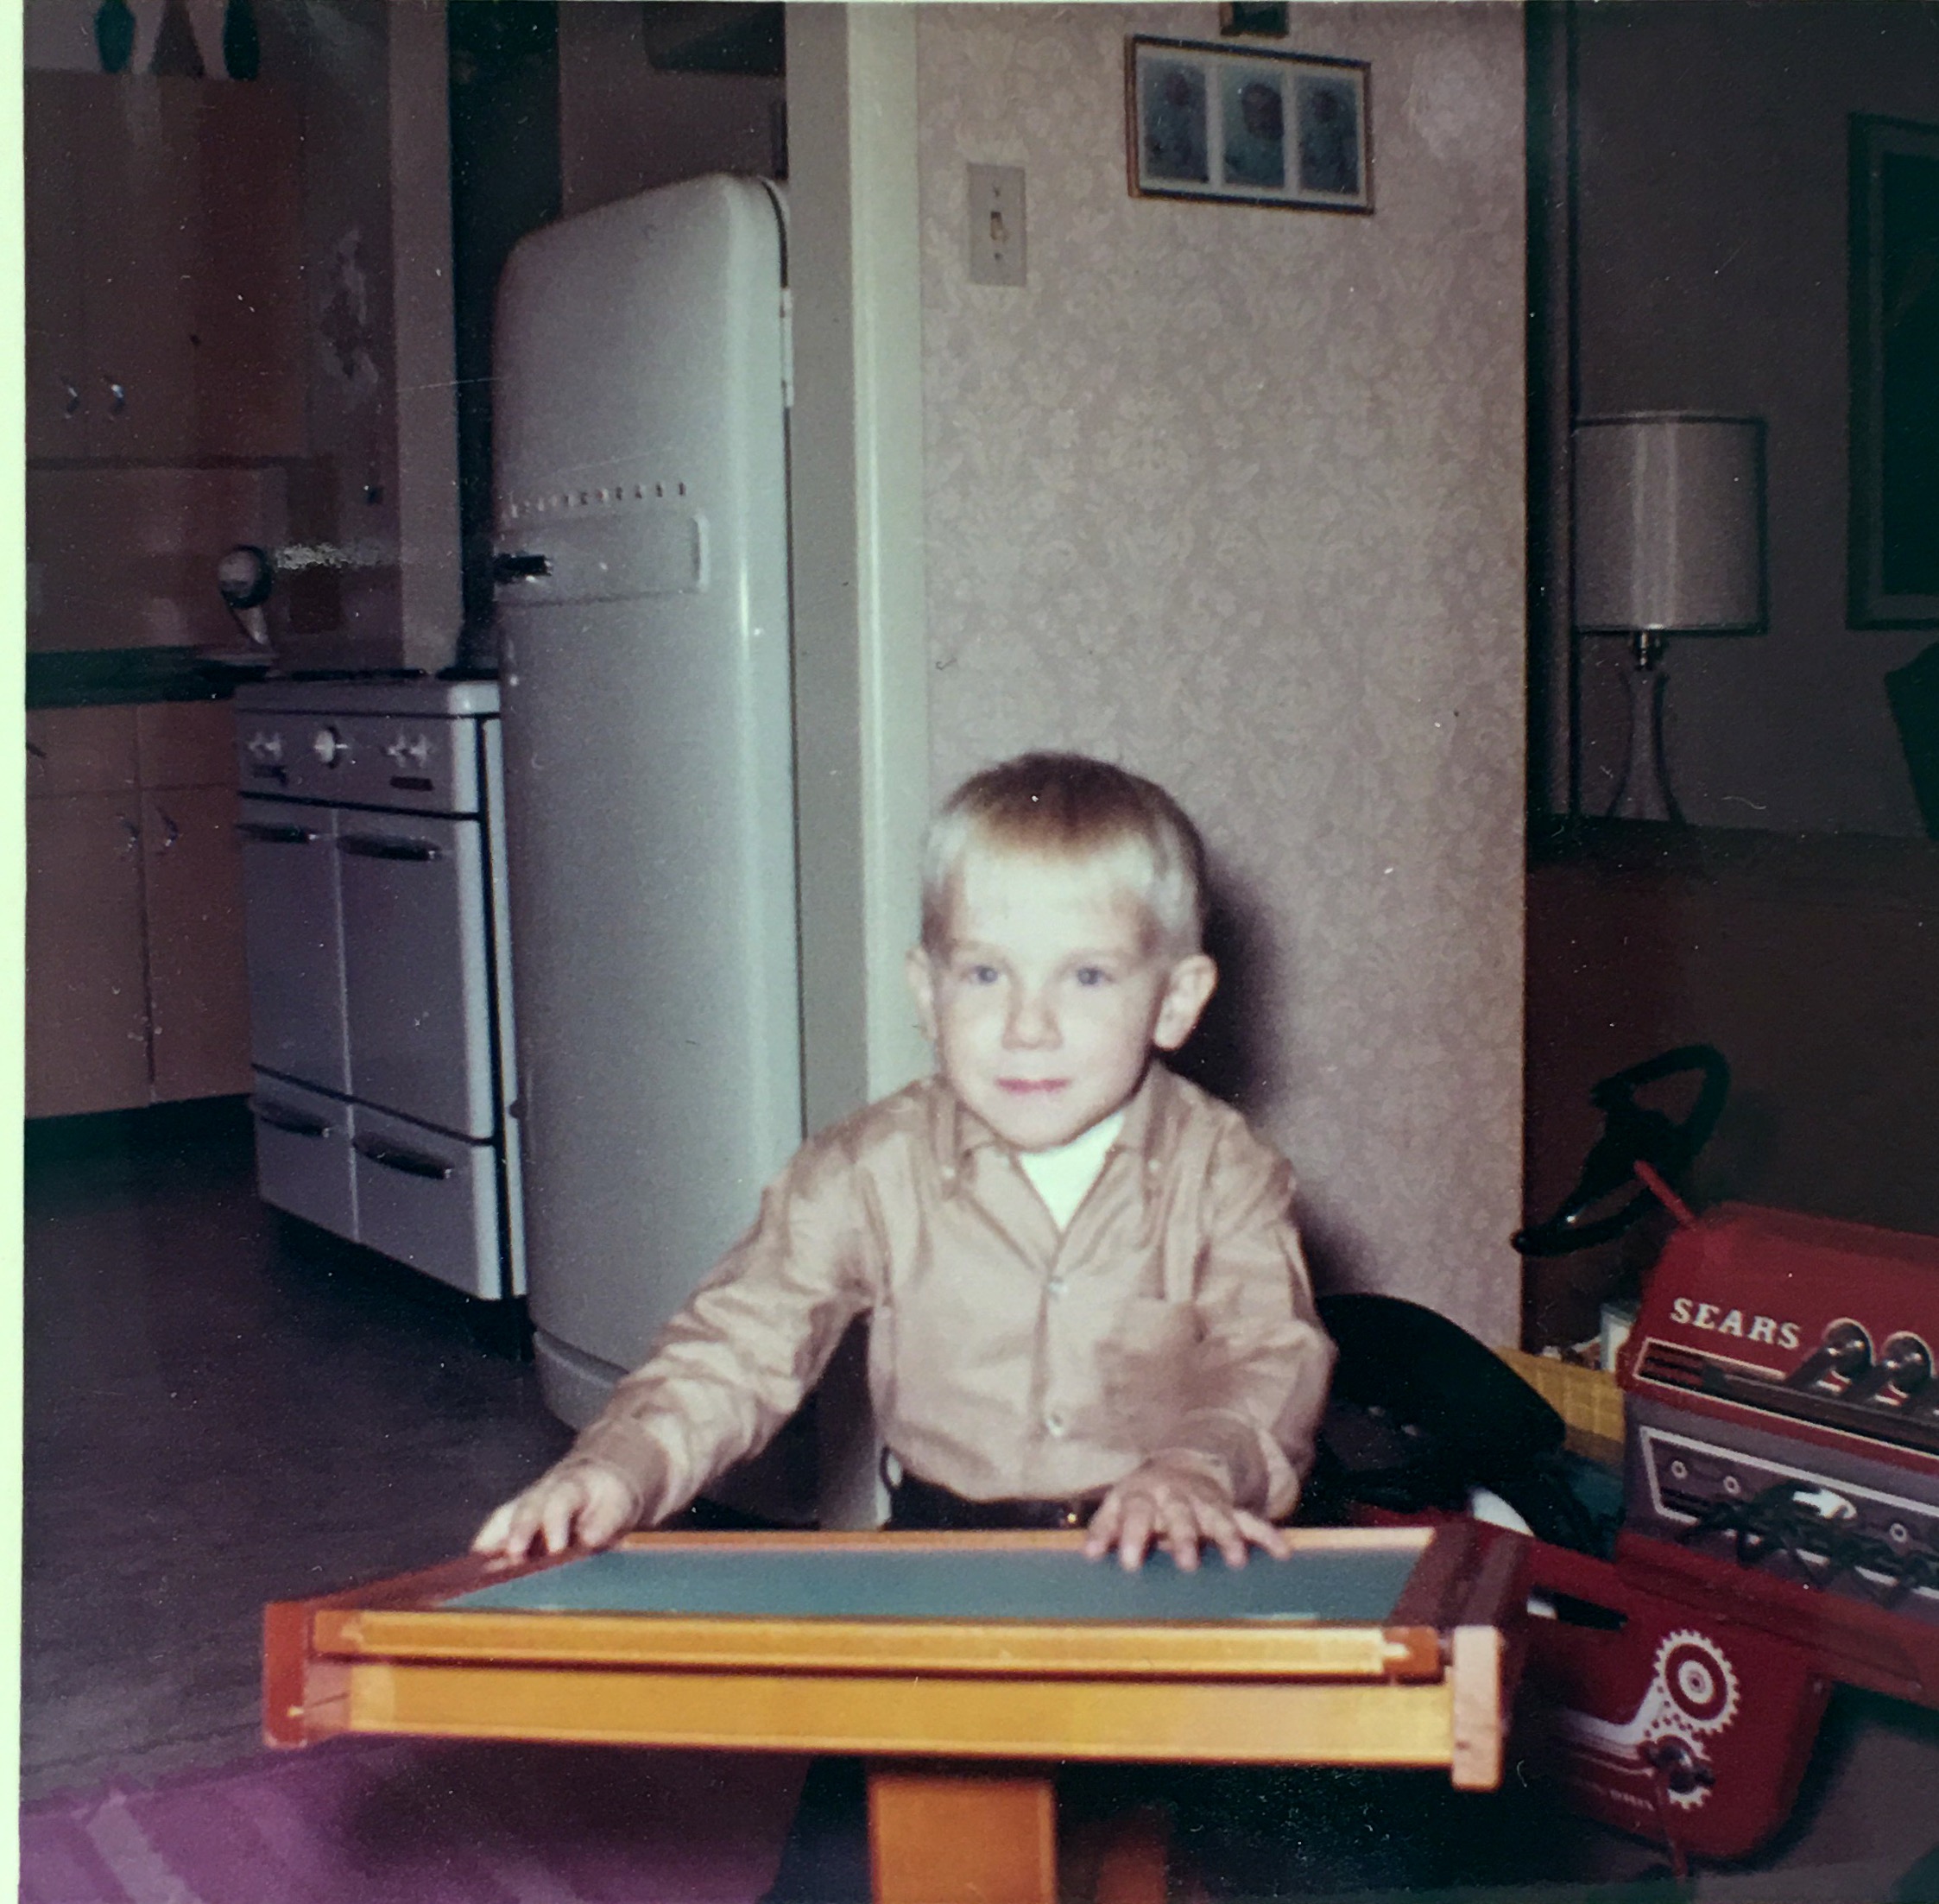 ‘James Scott Stroud Age 3 1965. This is me and my peg board.’ (Written on back)